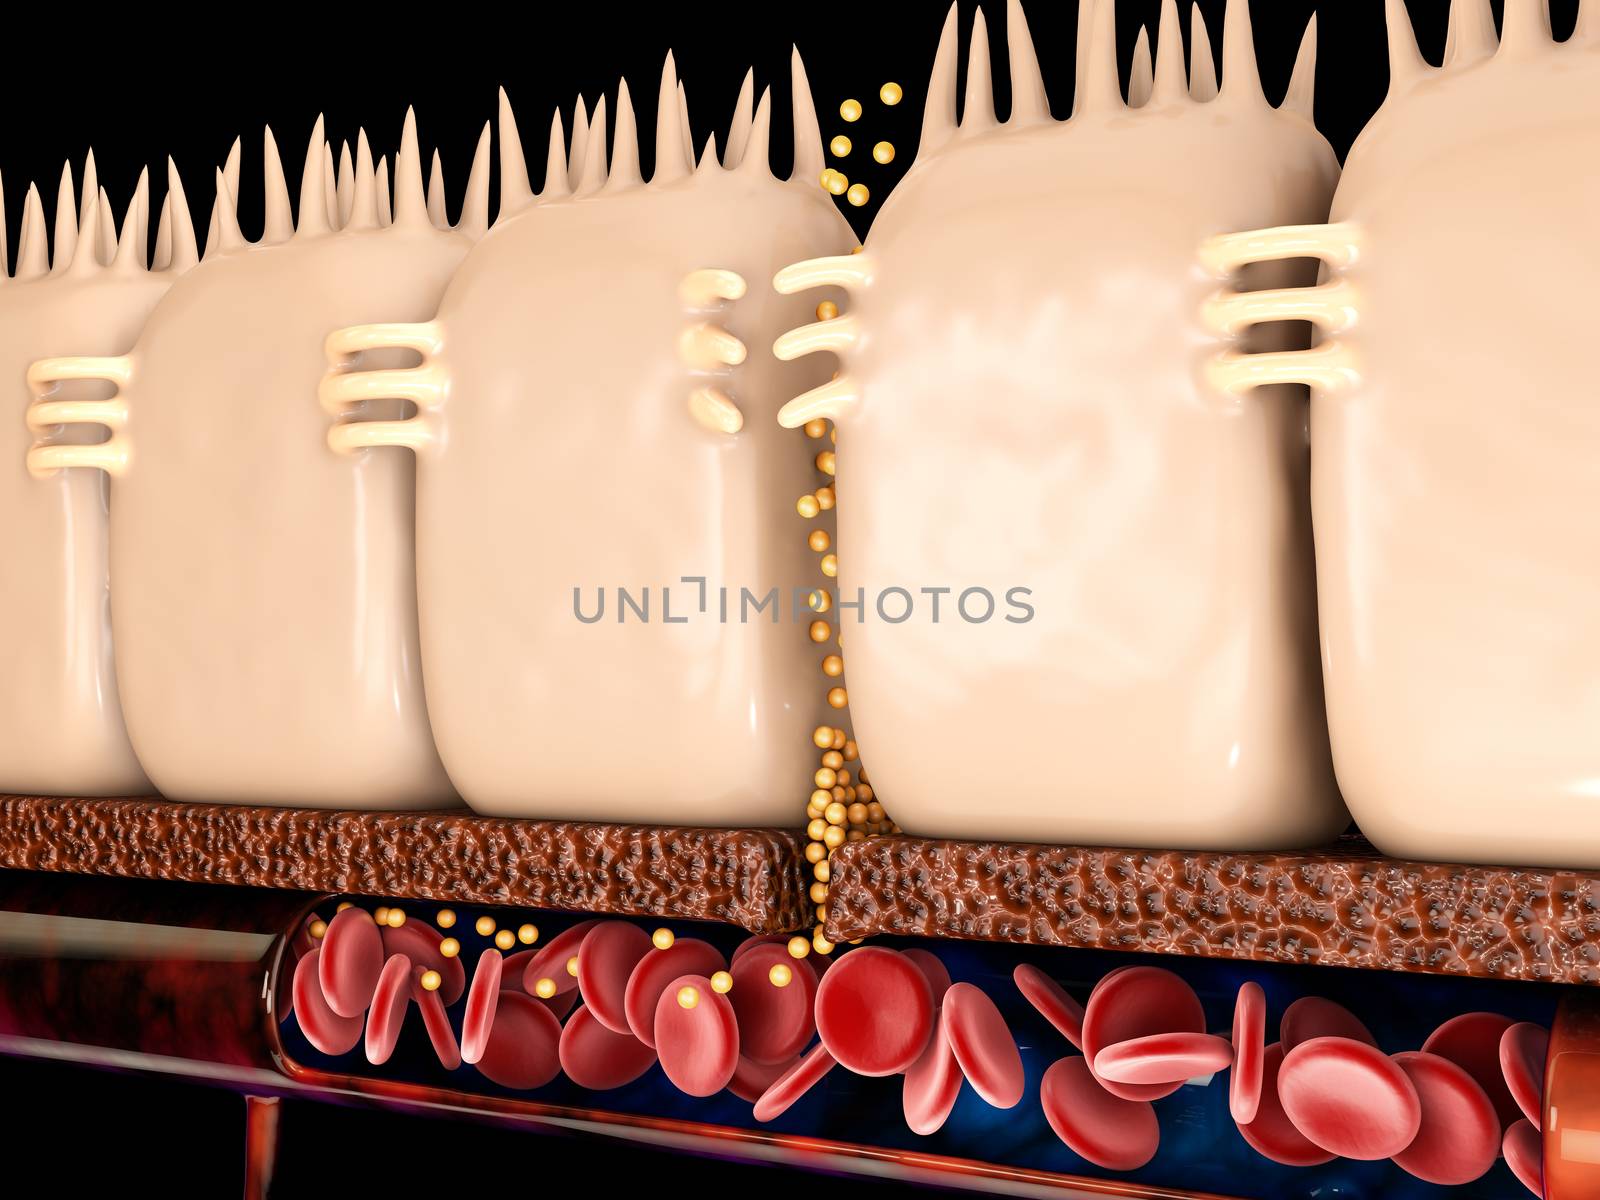 3d Rendering of leaky gut, in intestine with celiac disease and gluten sensitivity these tight junctions come apart. by tussik